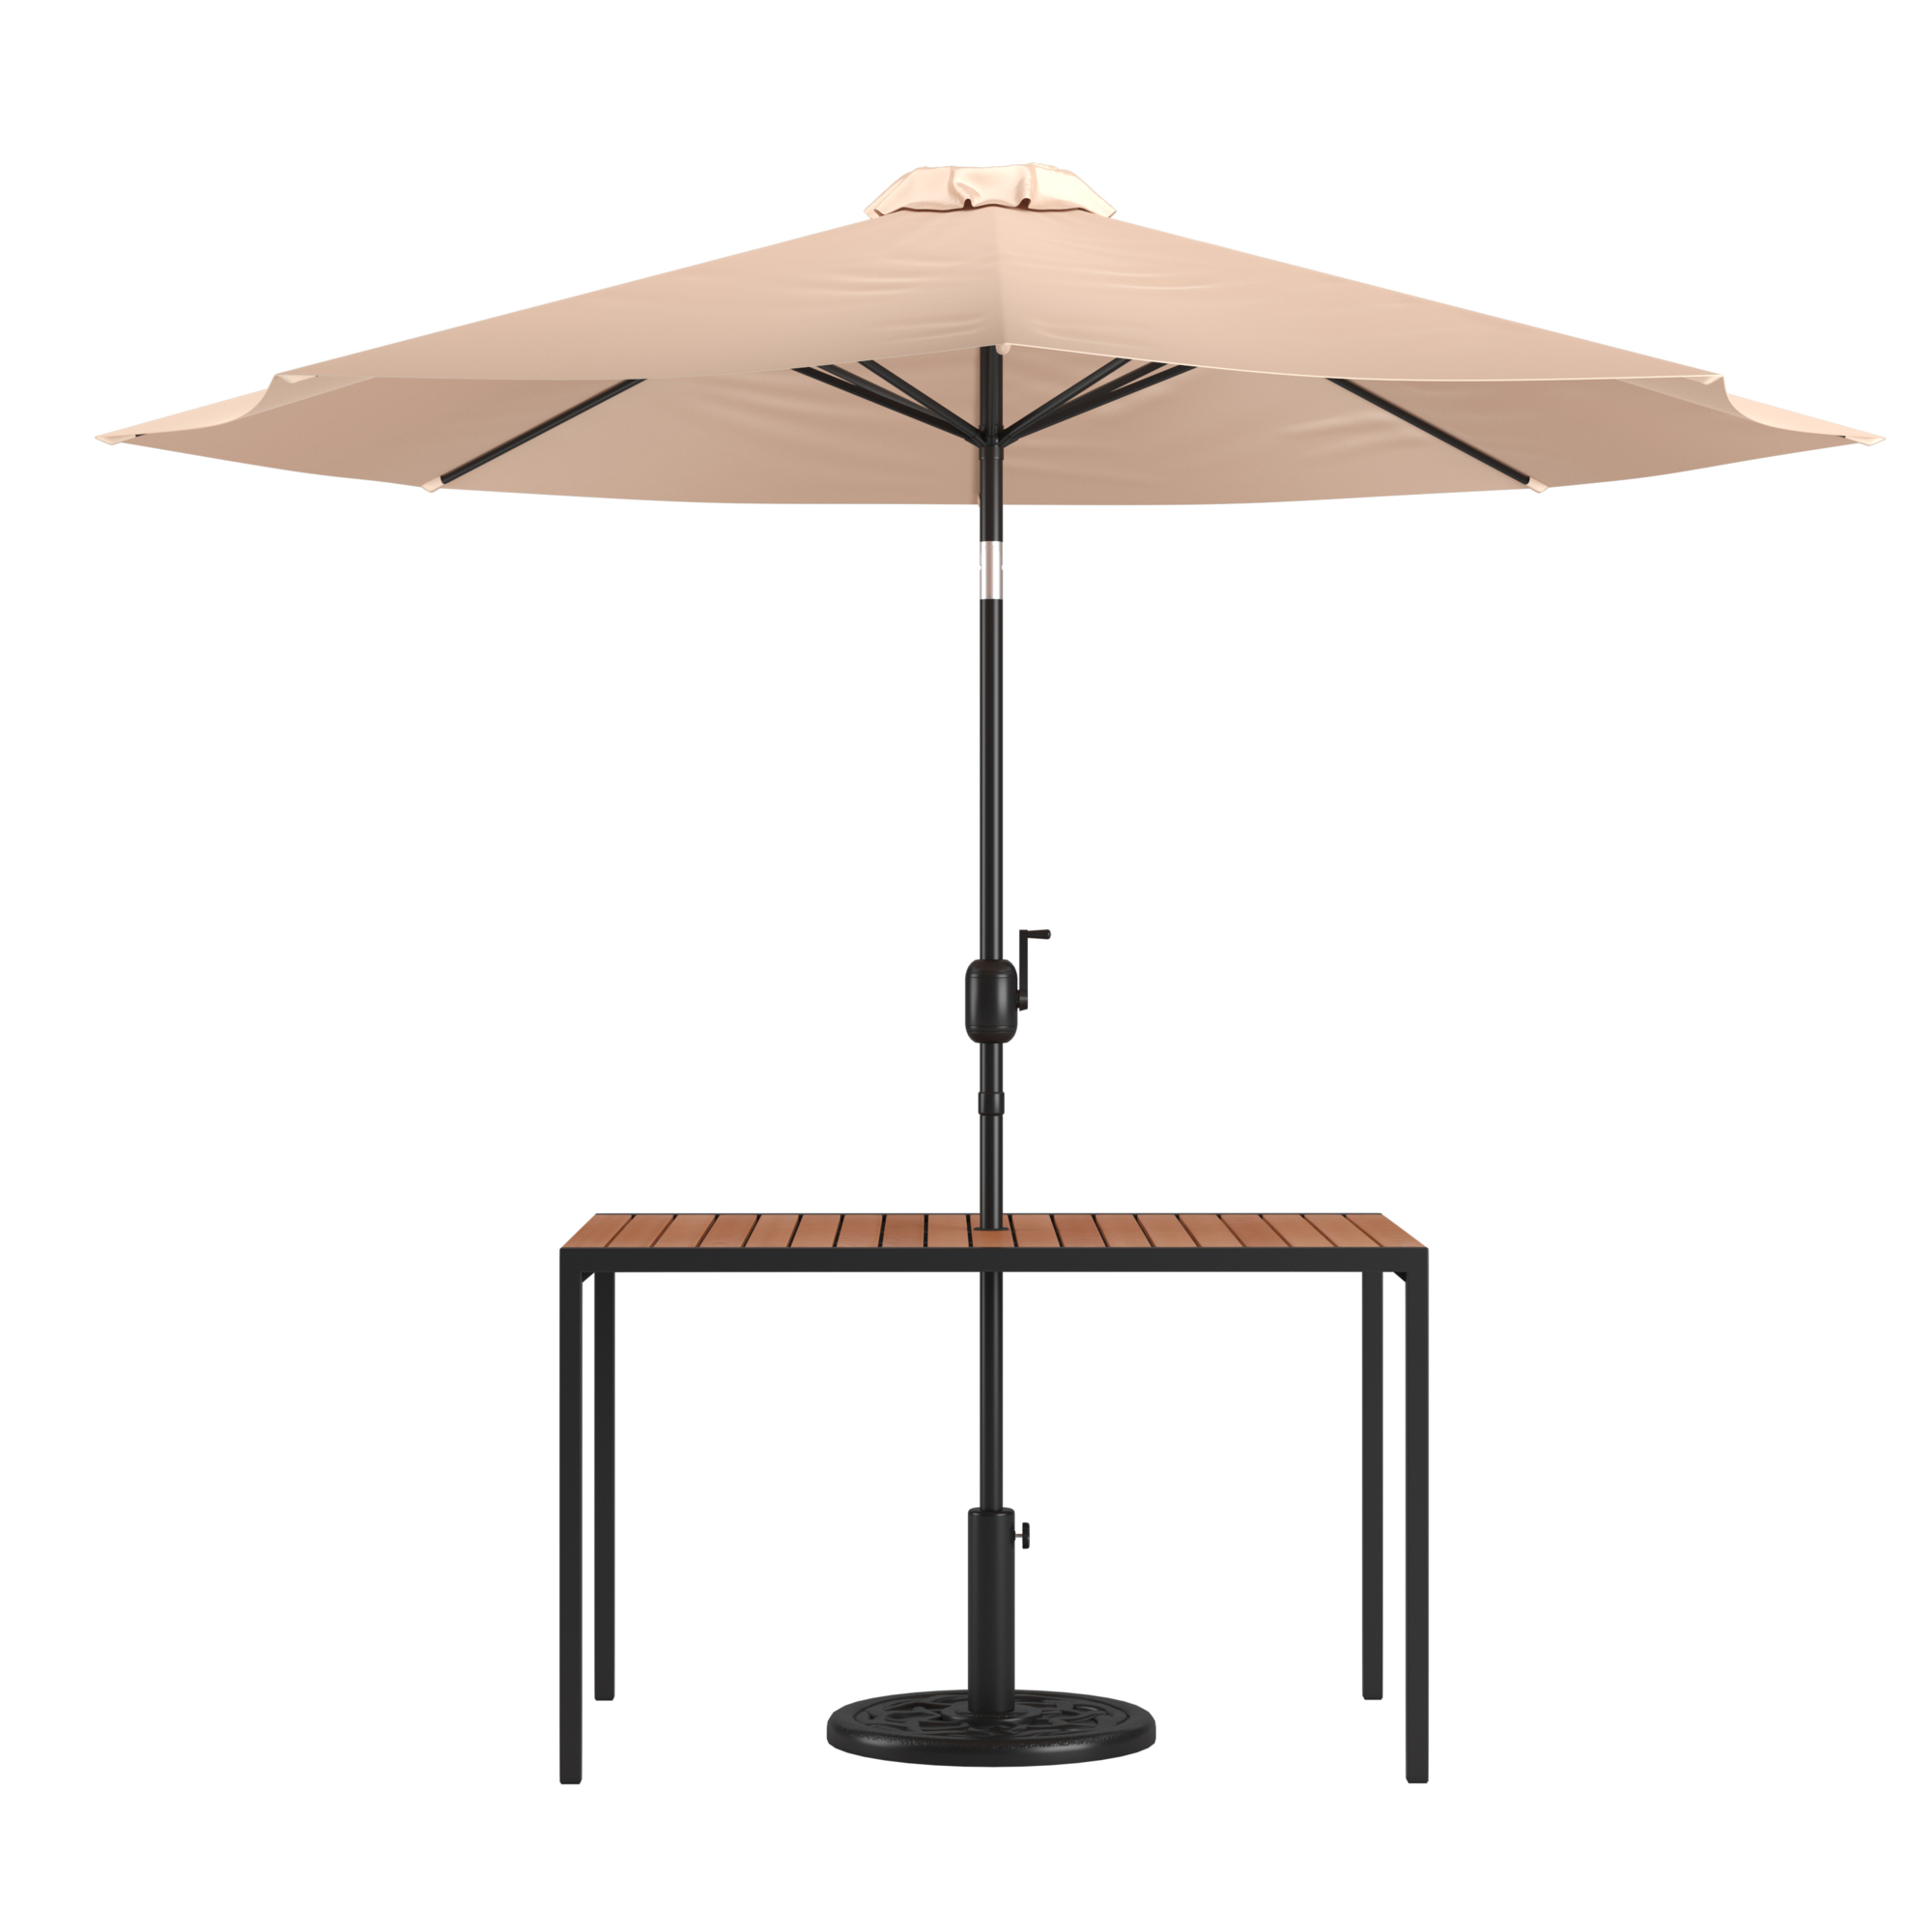 Flash Furniture, Faux Teak 30 x 48 Patio Table-Tan Umbrella Base, Table Shape Rectangle, Primary Color Beige, Height 29.5 in, Model XU3048UB19BTN